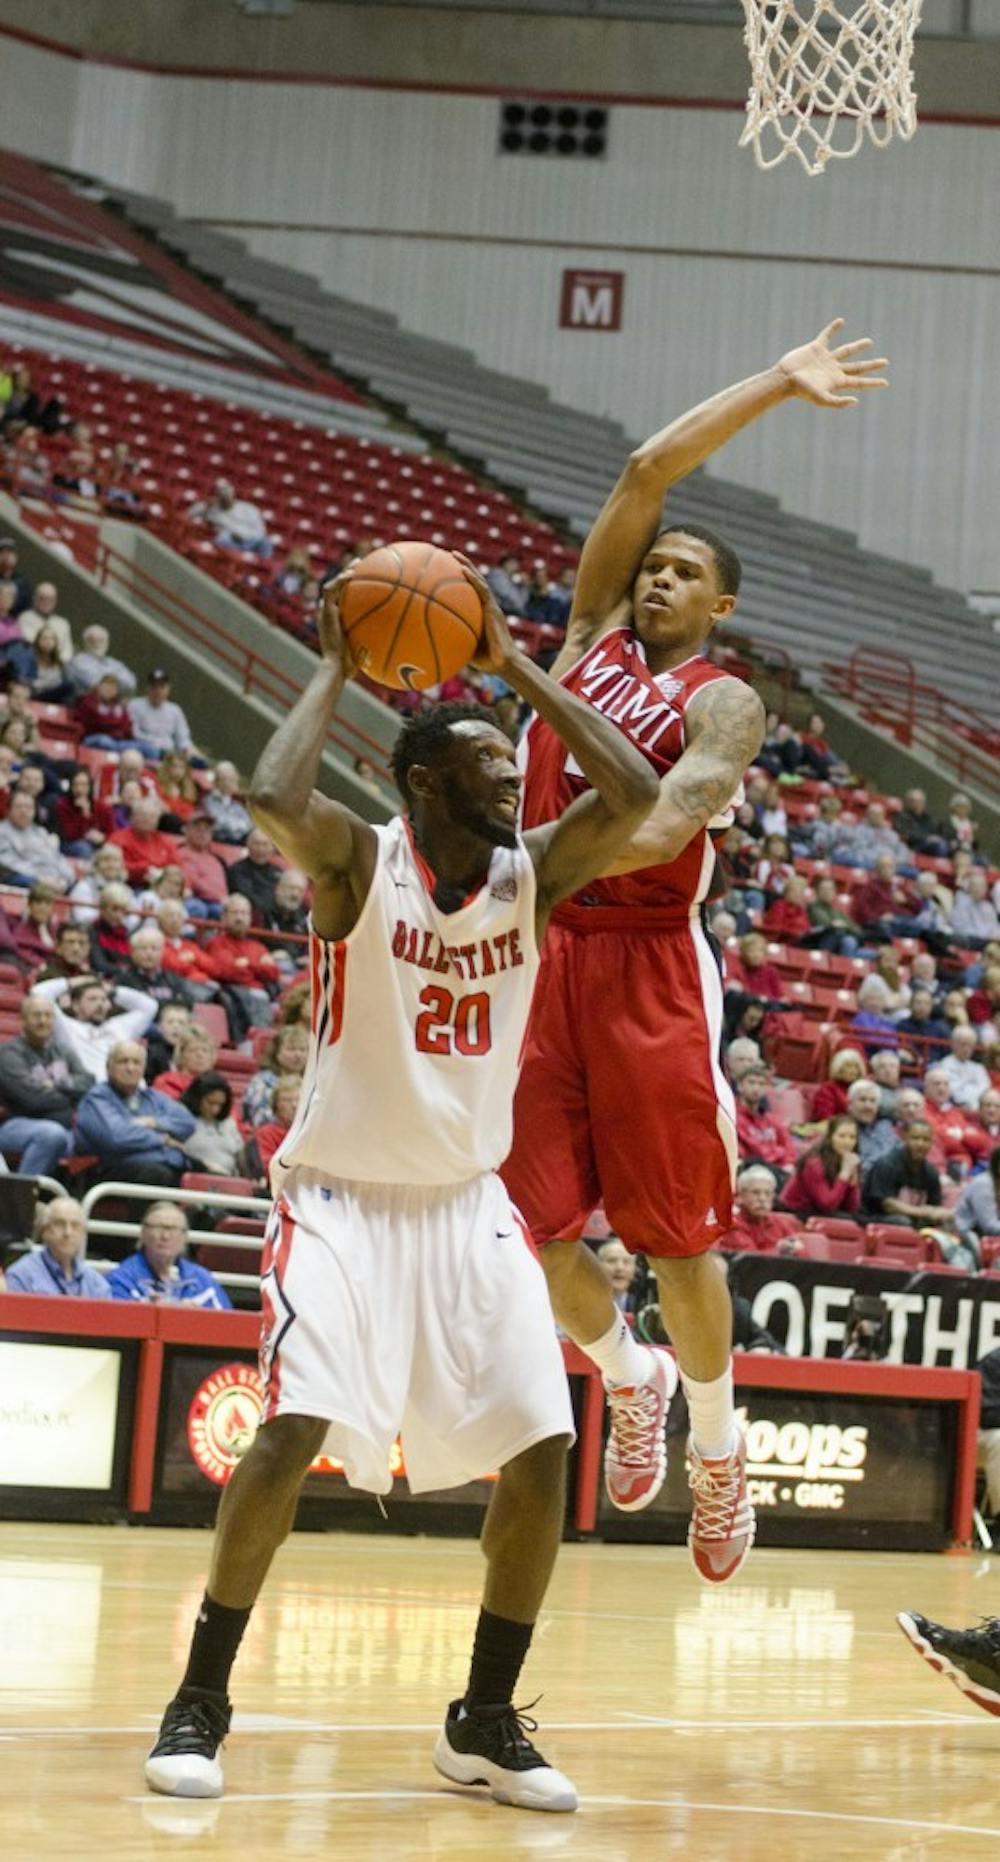 Senior forward Chris Bond goes for a shot as Miami defenders try to block him Jan. 18 at Worthen Arena. DN PHOTO BREANNA DAUGHERTY